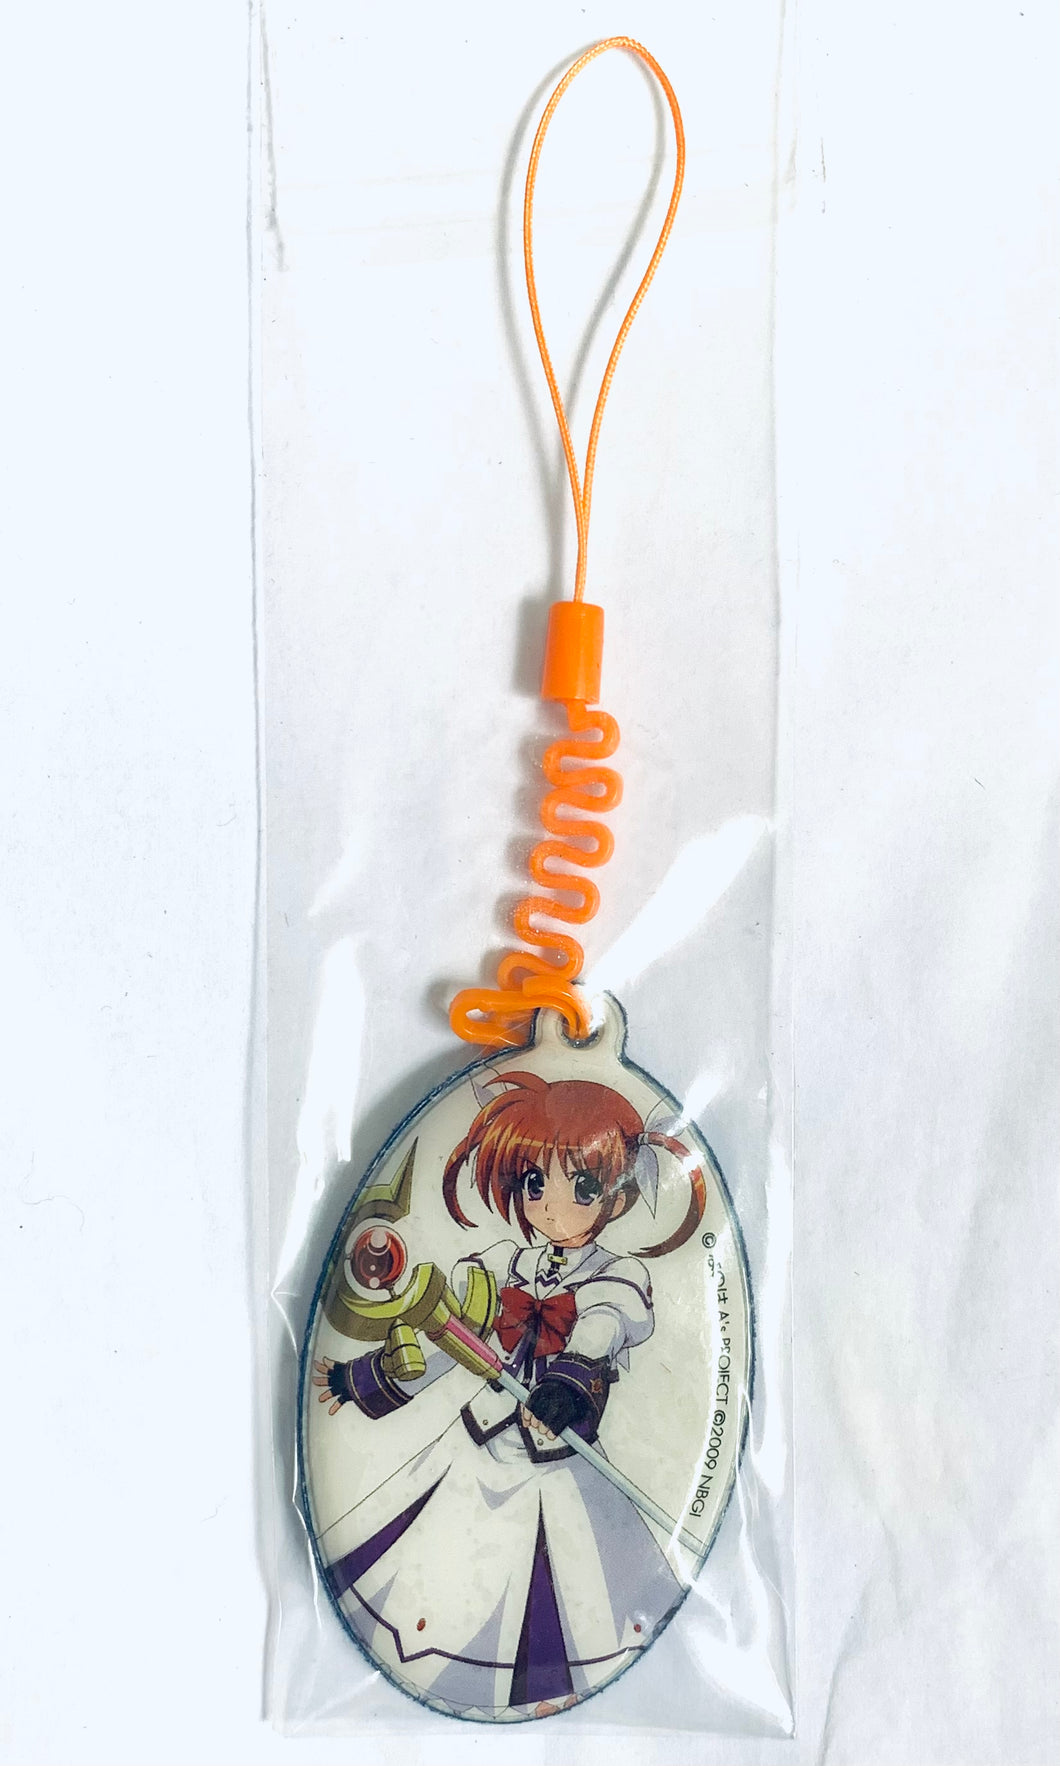 Magical Girl Lyrical Nanoha A’s Portable -THE BATTLE OF ACES- Mobile Cleaner Comptique January 2009 Appendix